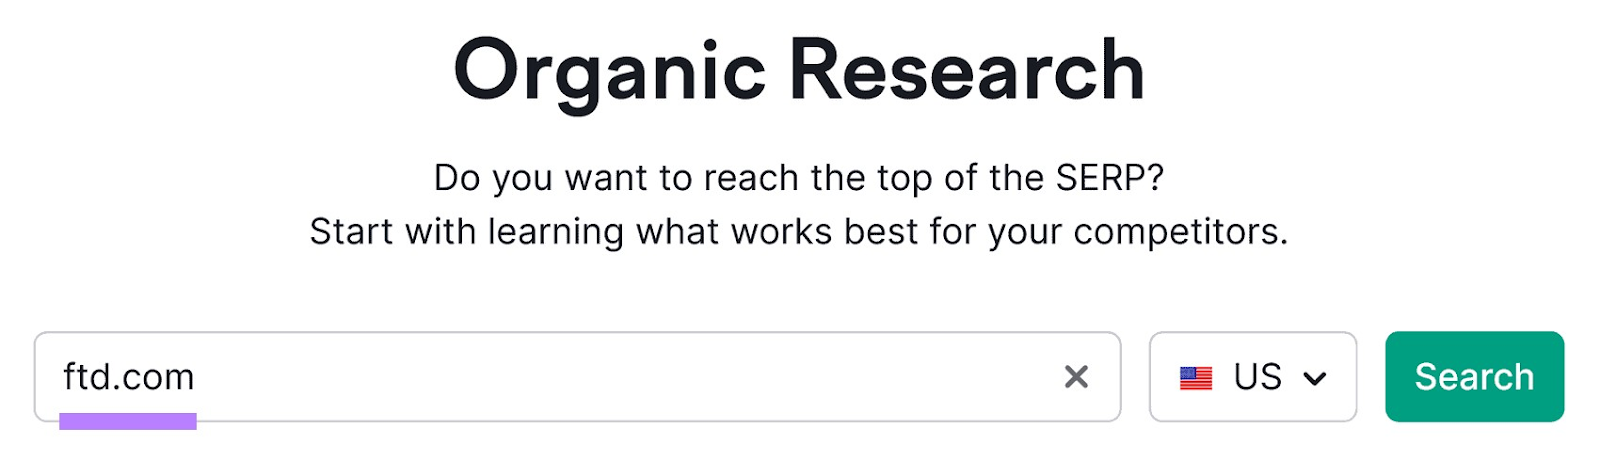 "ftd.com" entered into Organic Research tool search bar